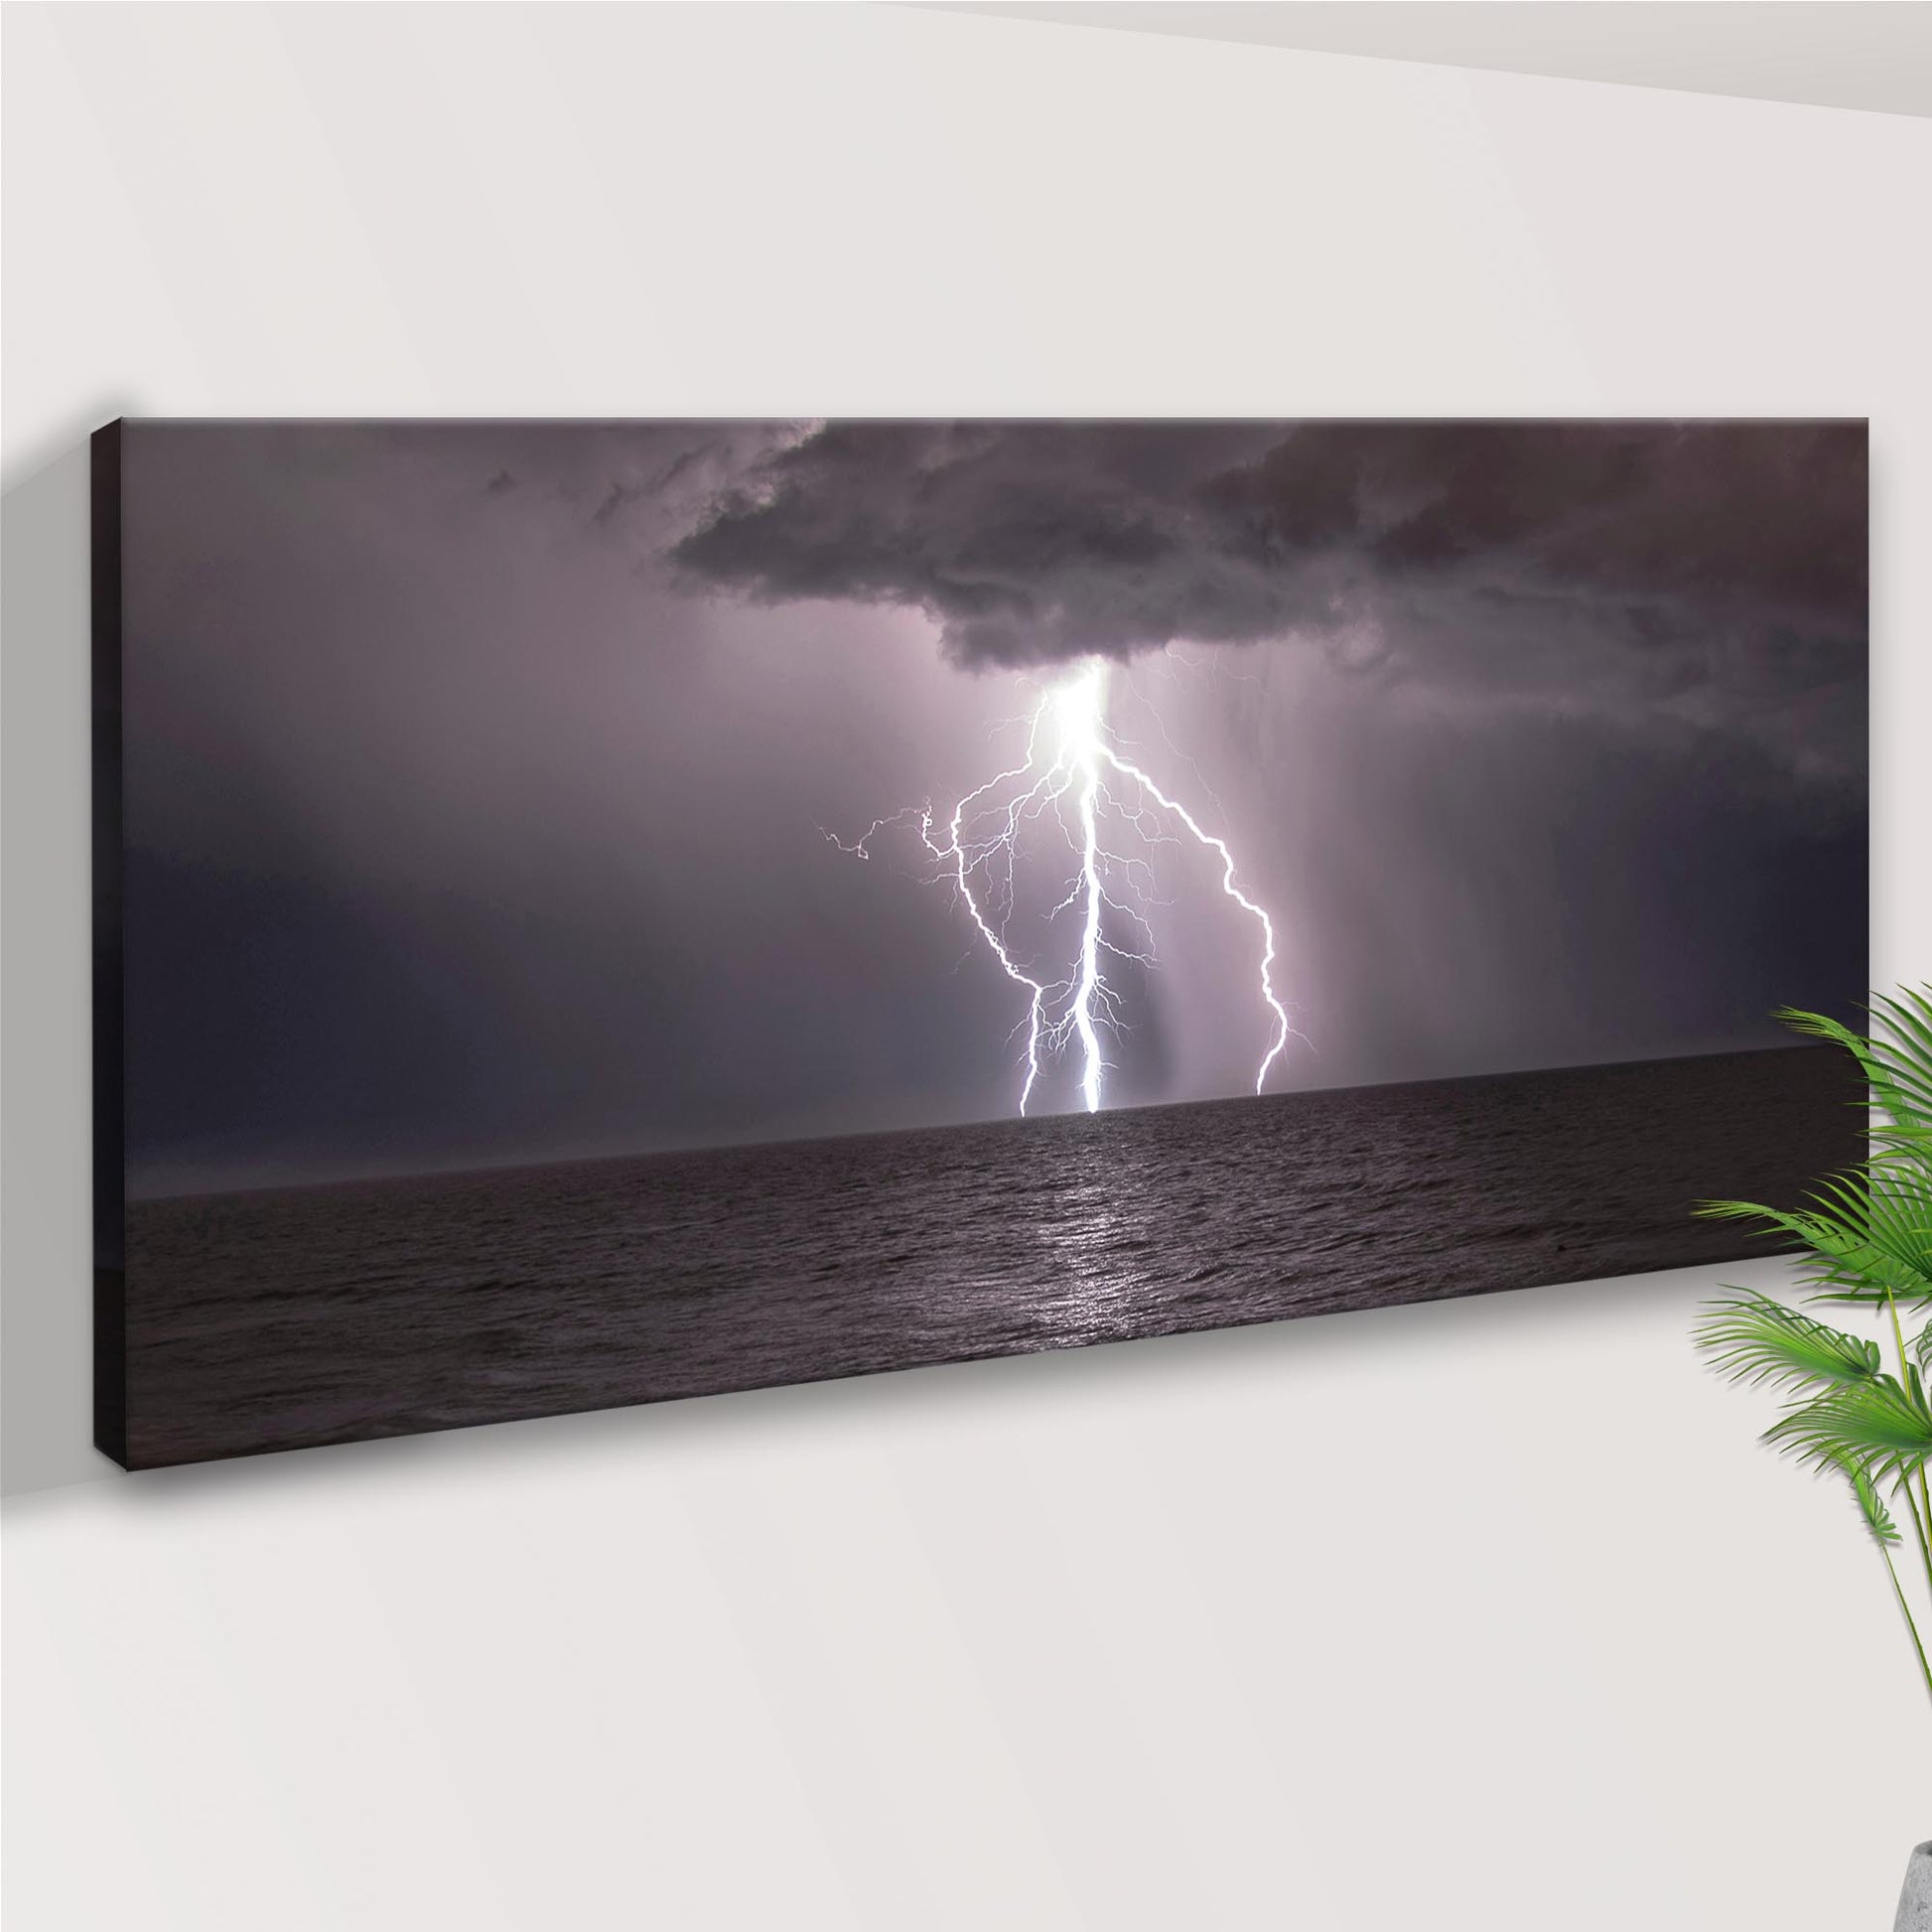 Ocean Thunder Storm Bolt Canvas Wall Art Style 1 - Image by Tailored Canvases